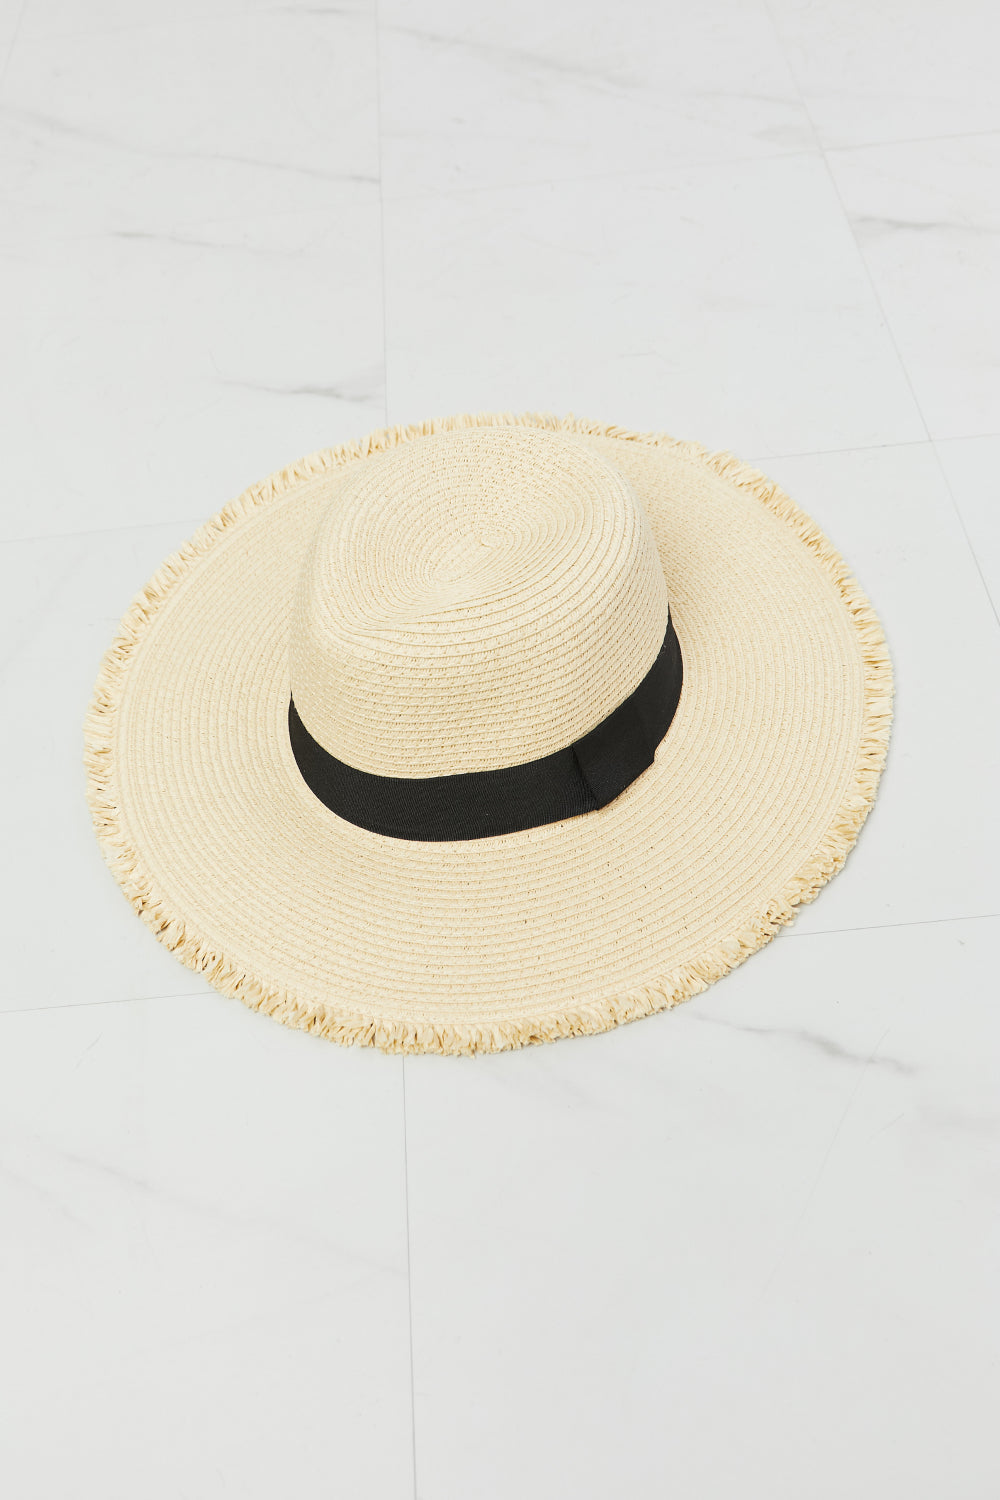 Fame Time For The Sun Straw Hat Print on any thing USA/STOD clothes